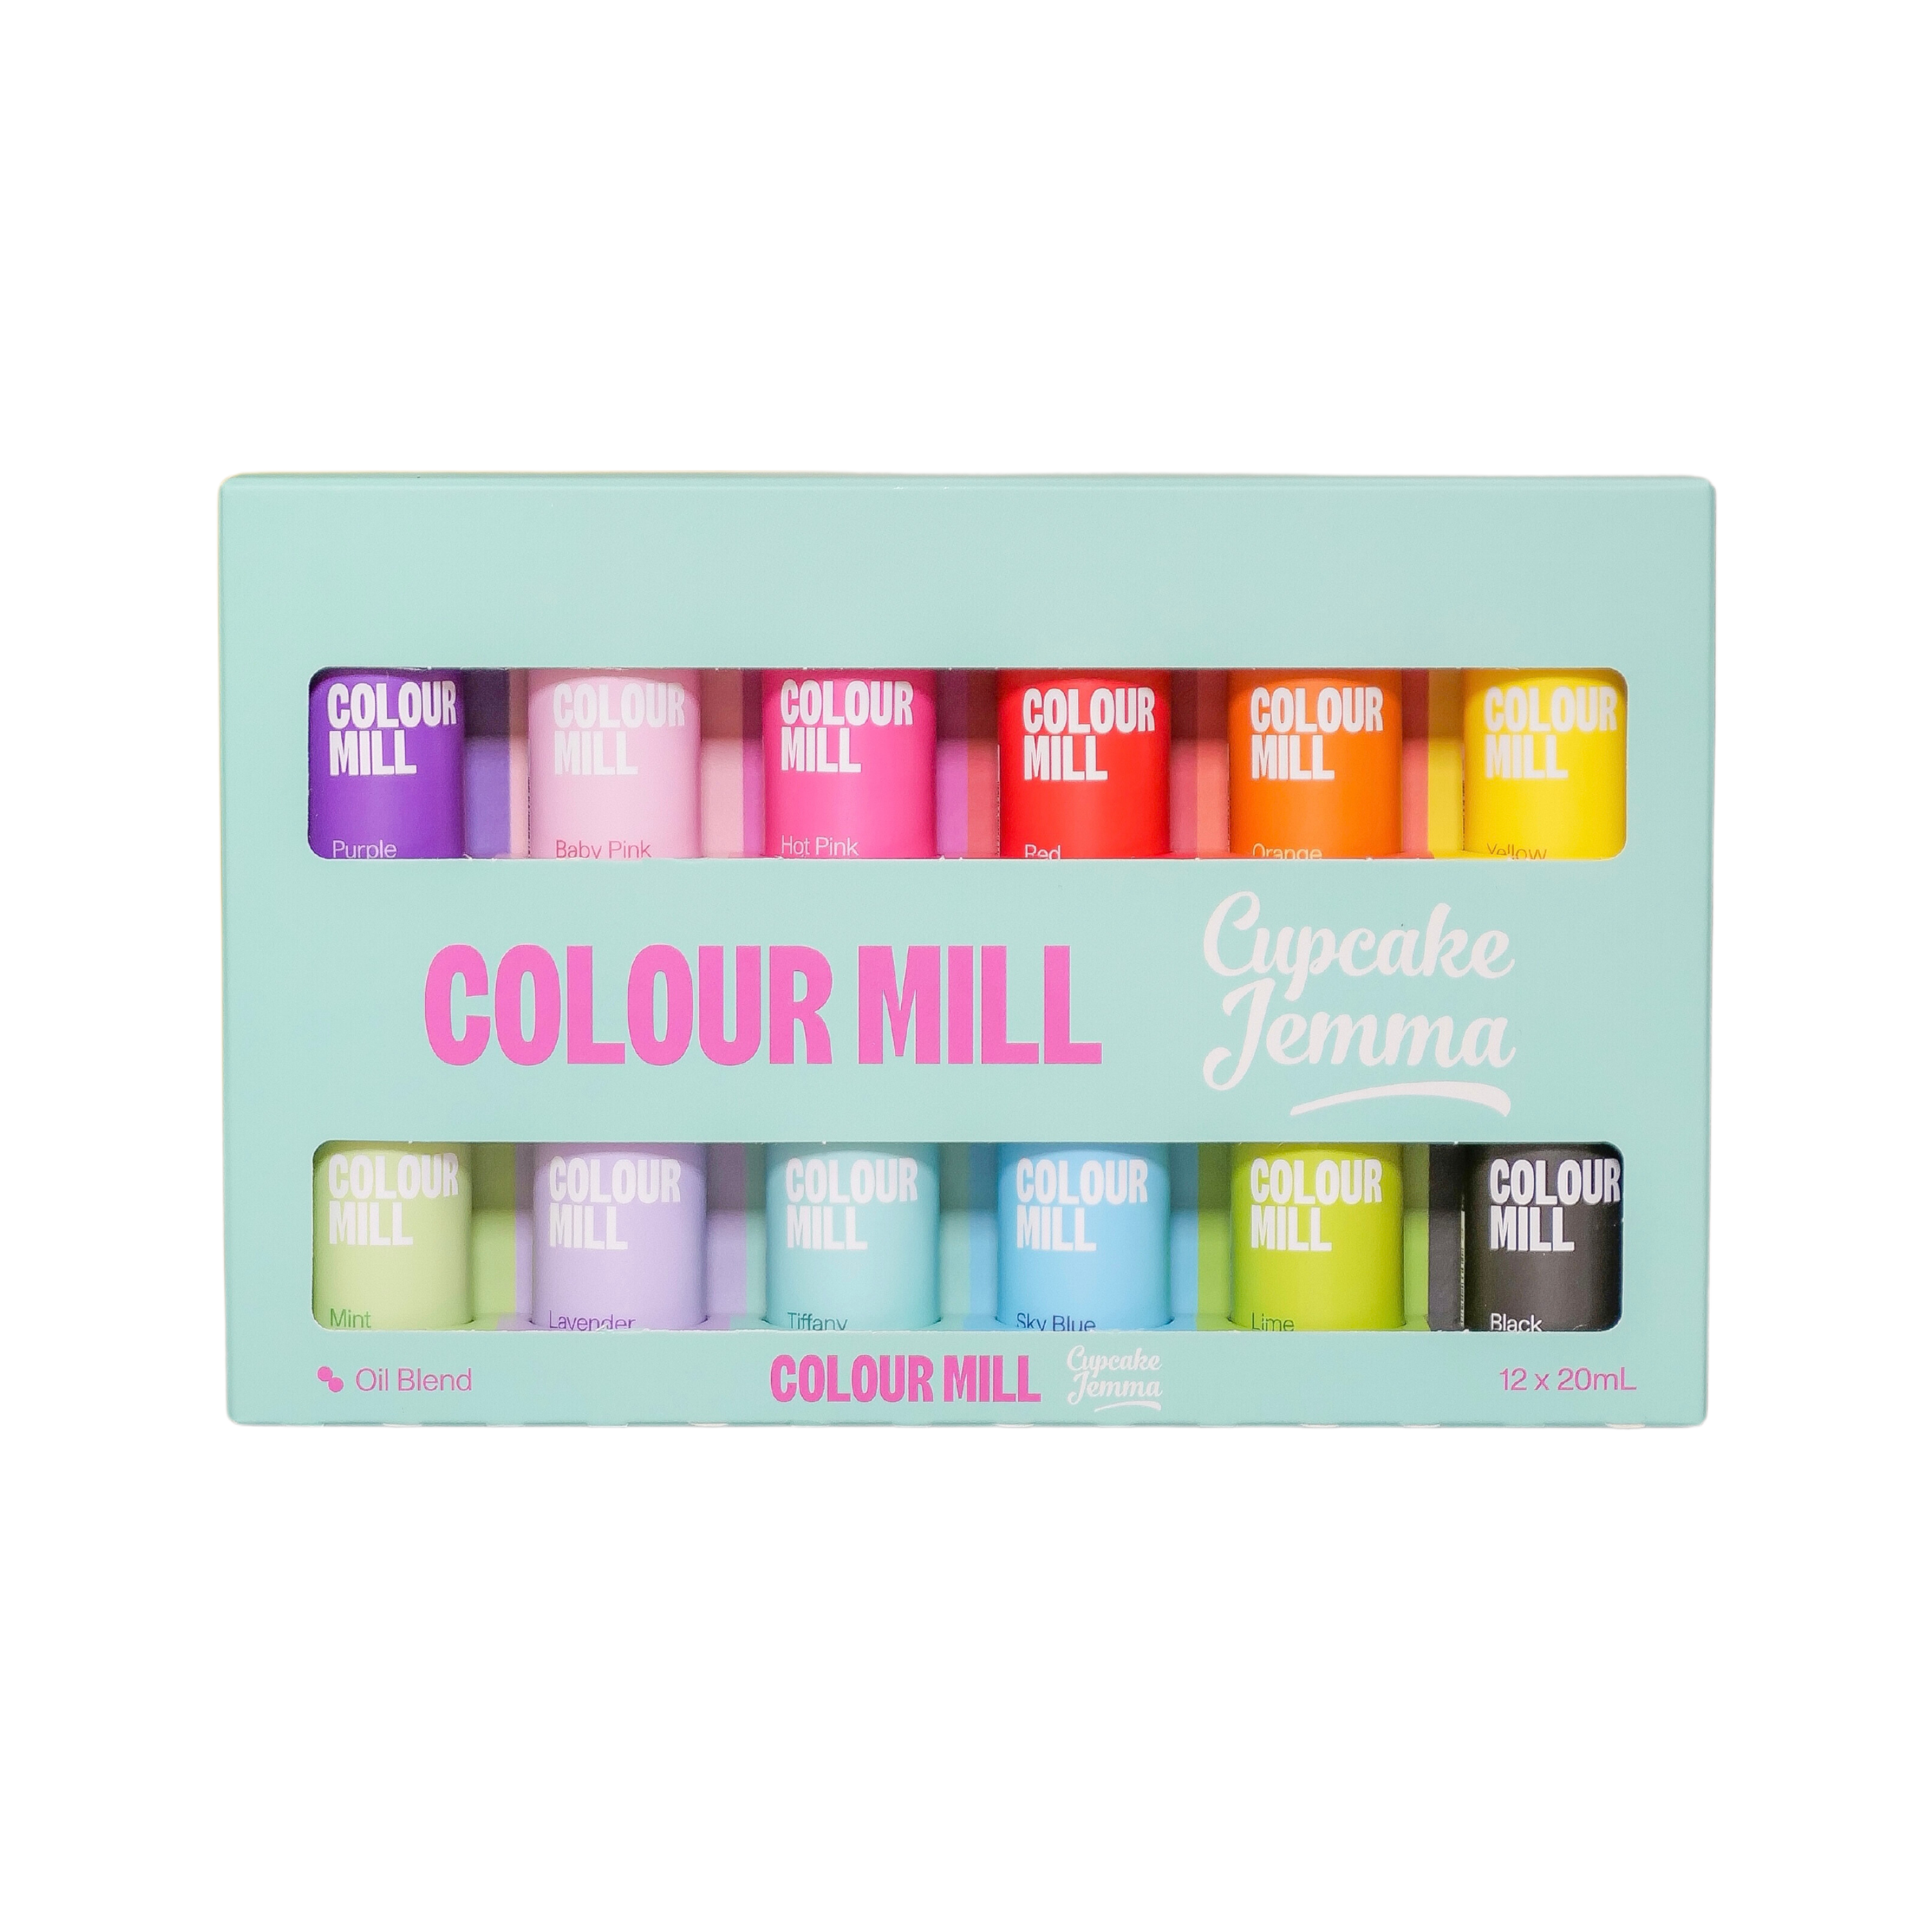 US Cupcake Jemma x Colour Mill Packproduct image